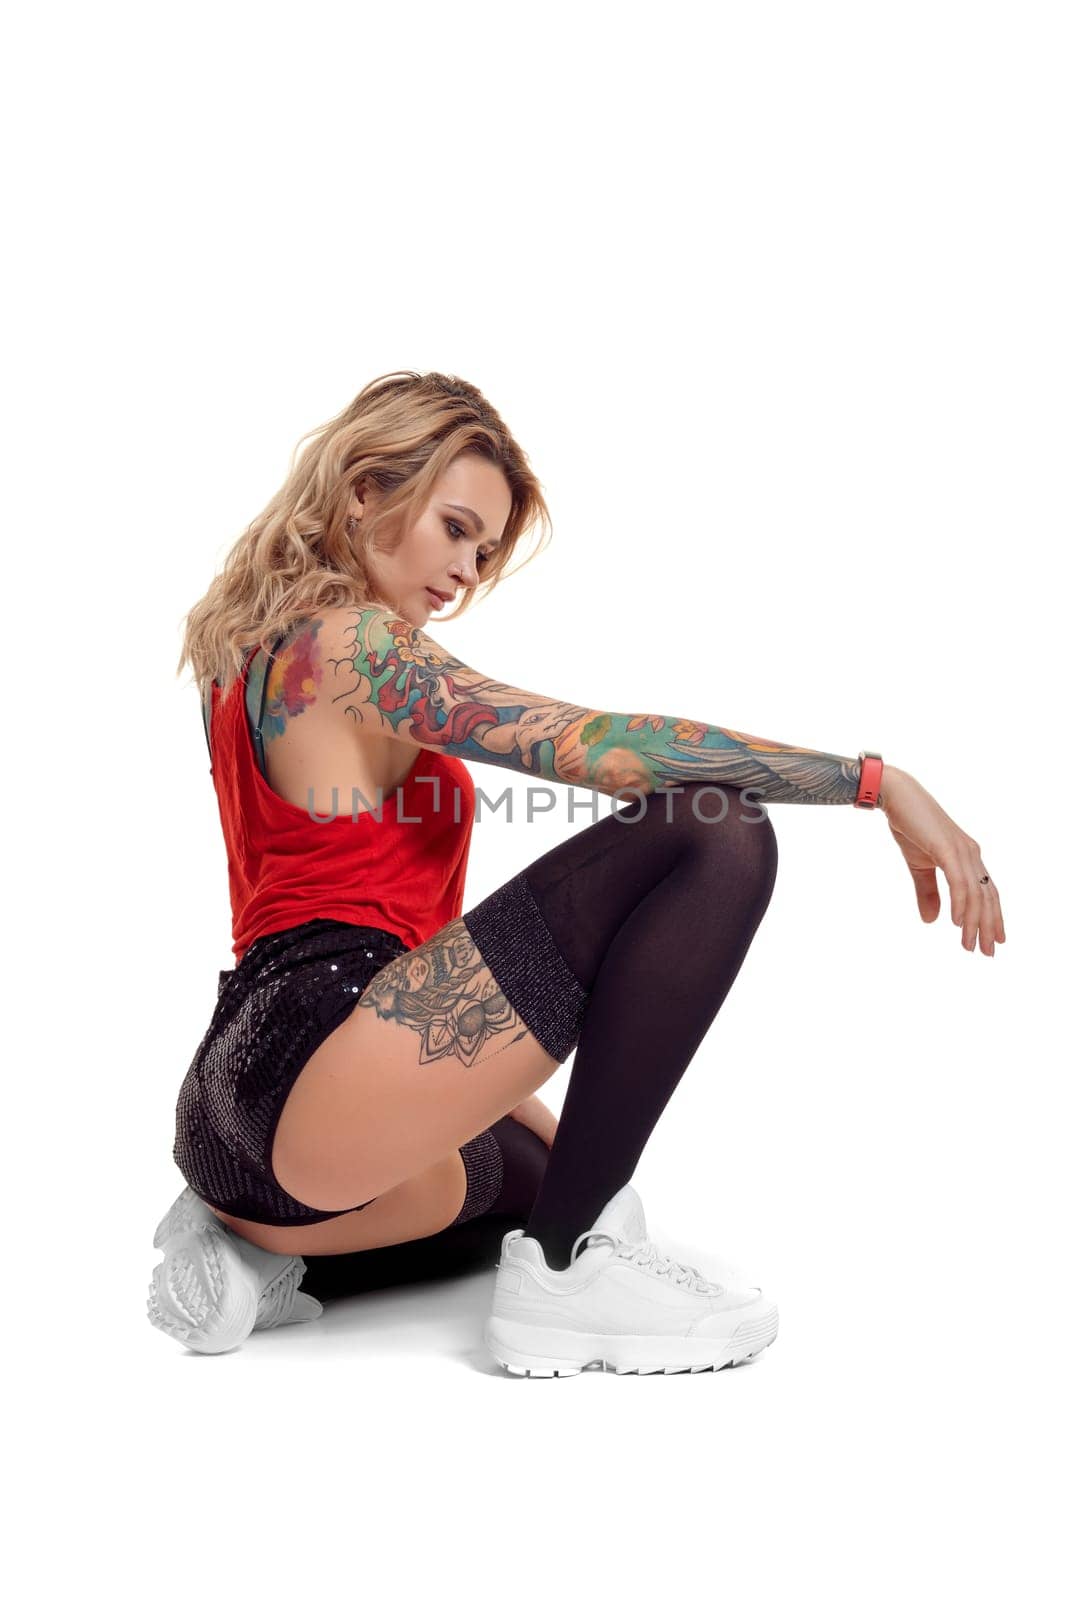 Charming blond woman with tattoed body and long curly hair is posing sitting sideways, isolated on white background with copy space. Young girl wearing in a black stockings and mini shorts, red top and white sneakers. Booty twerk dance in studio.